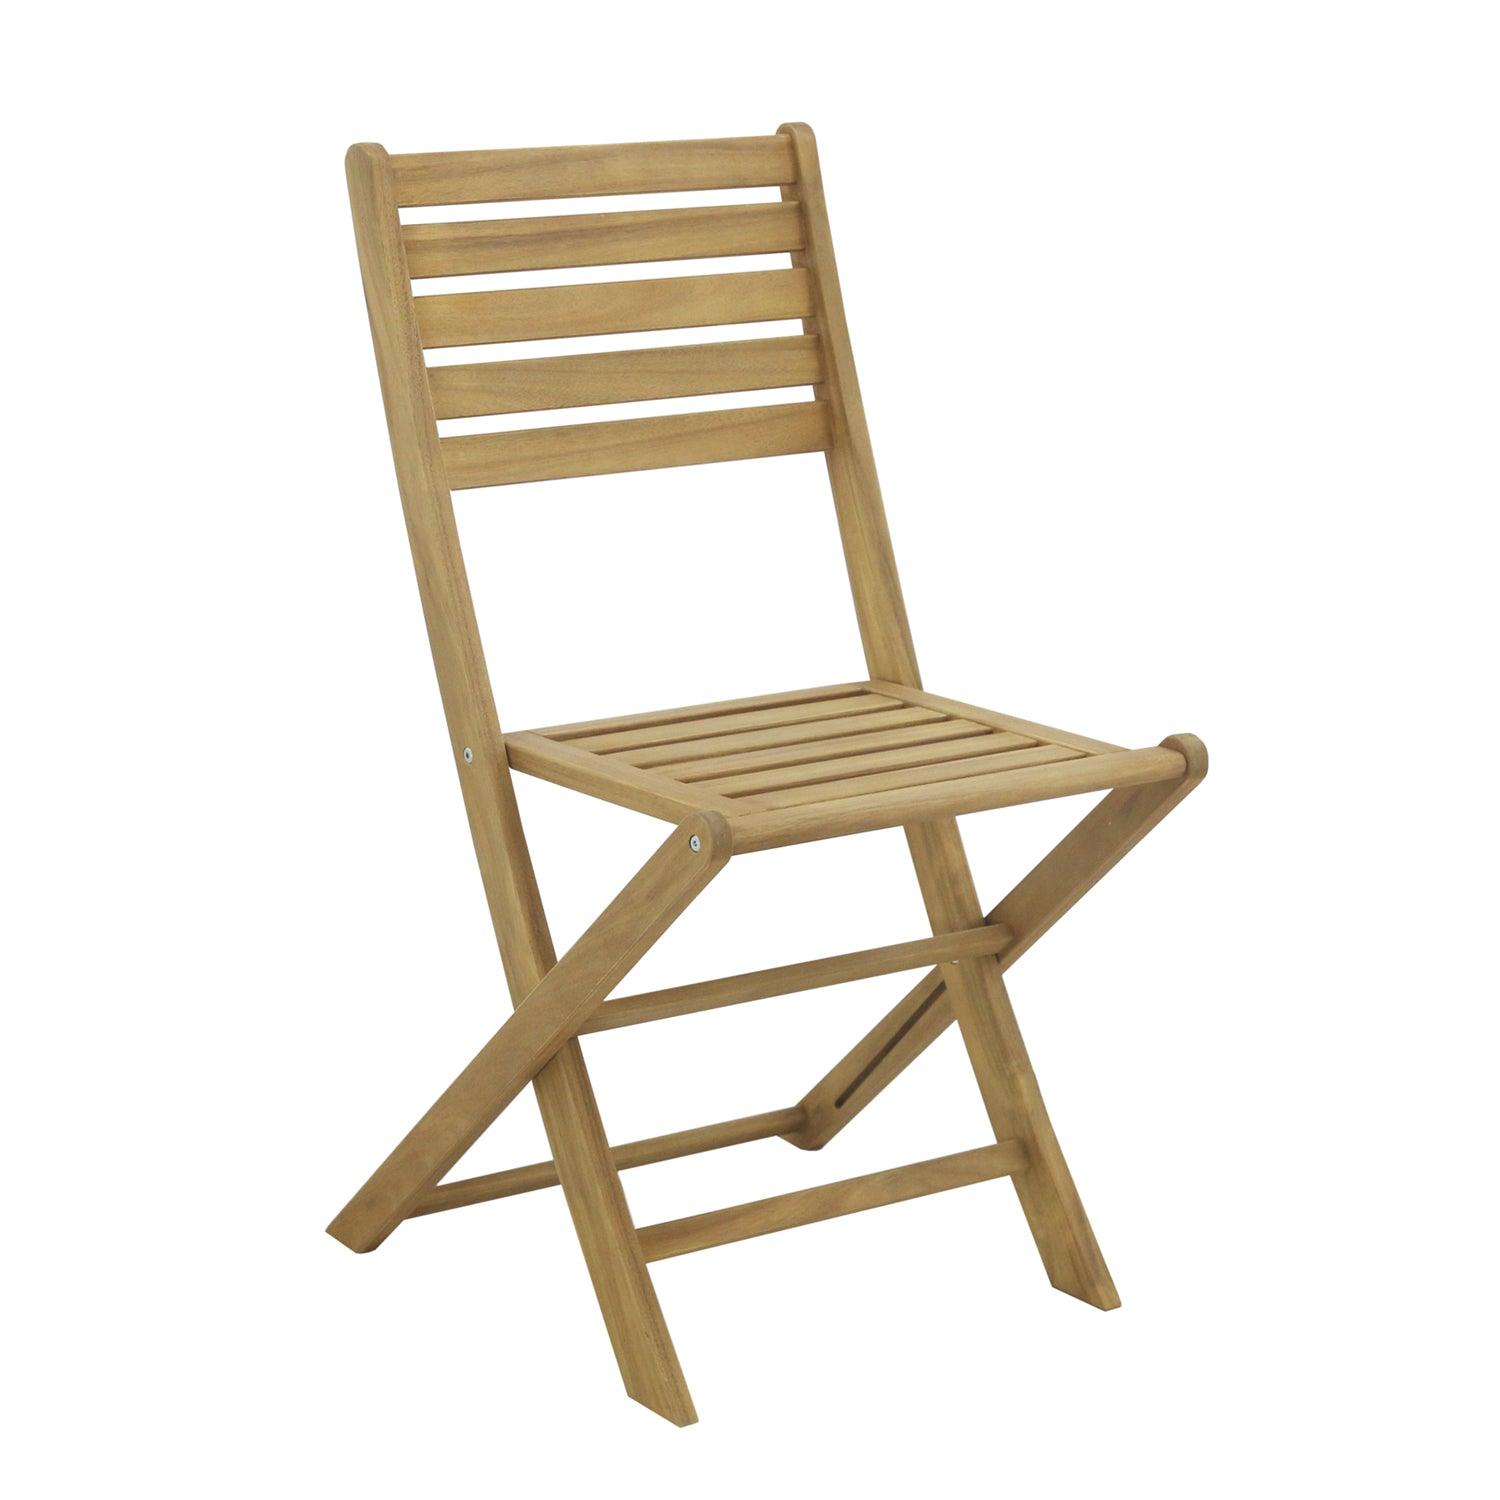 Outlet – Outdoor dining chairs - set of 2 - solid acacia wood - Laura James